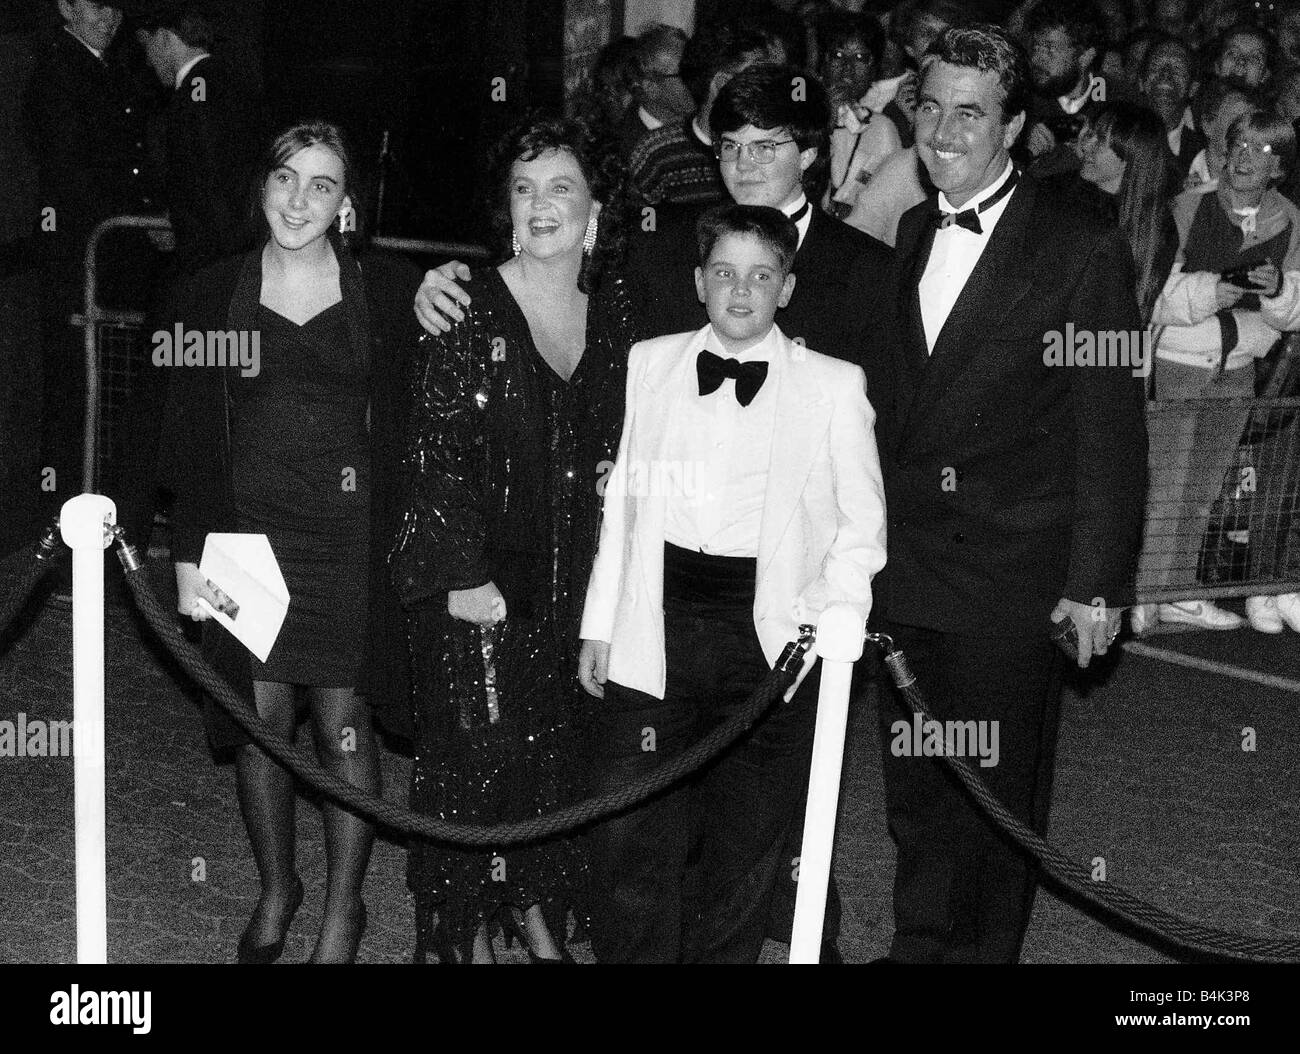 pauline-collins-with-her-actor-husband-john-alderton-and-family-at-B4K3P8.jpg